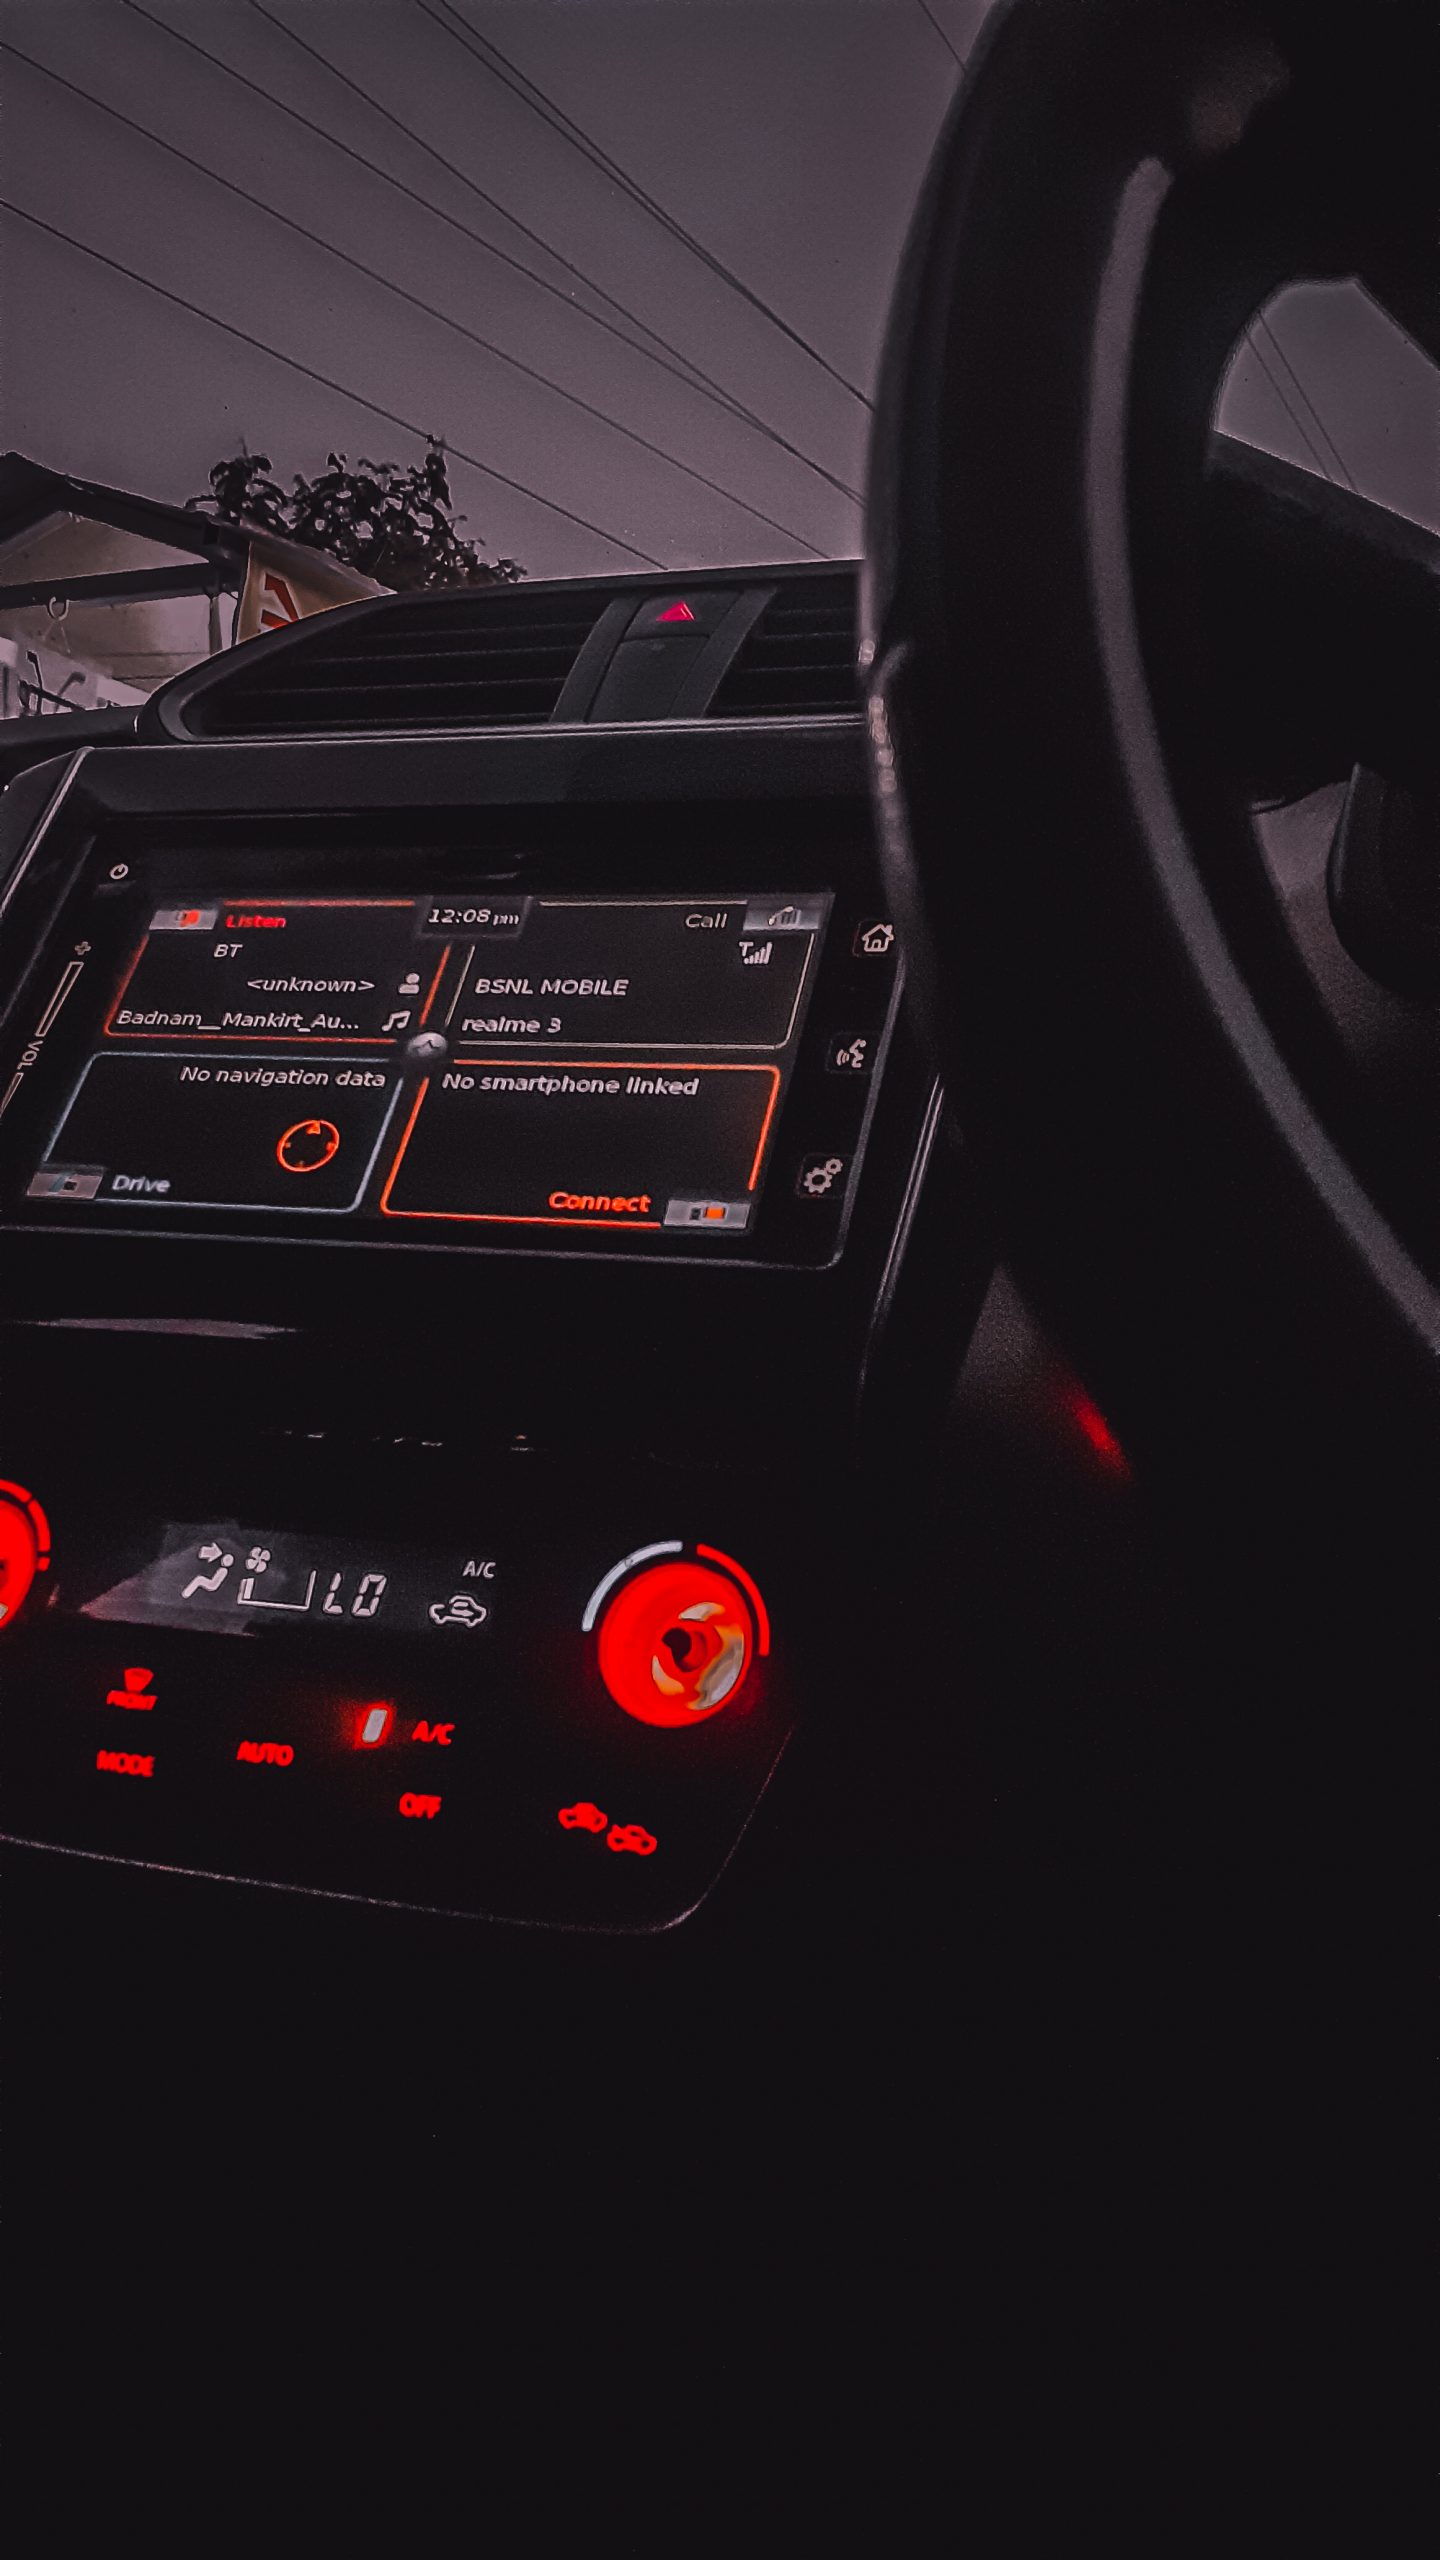 music system of a car